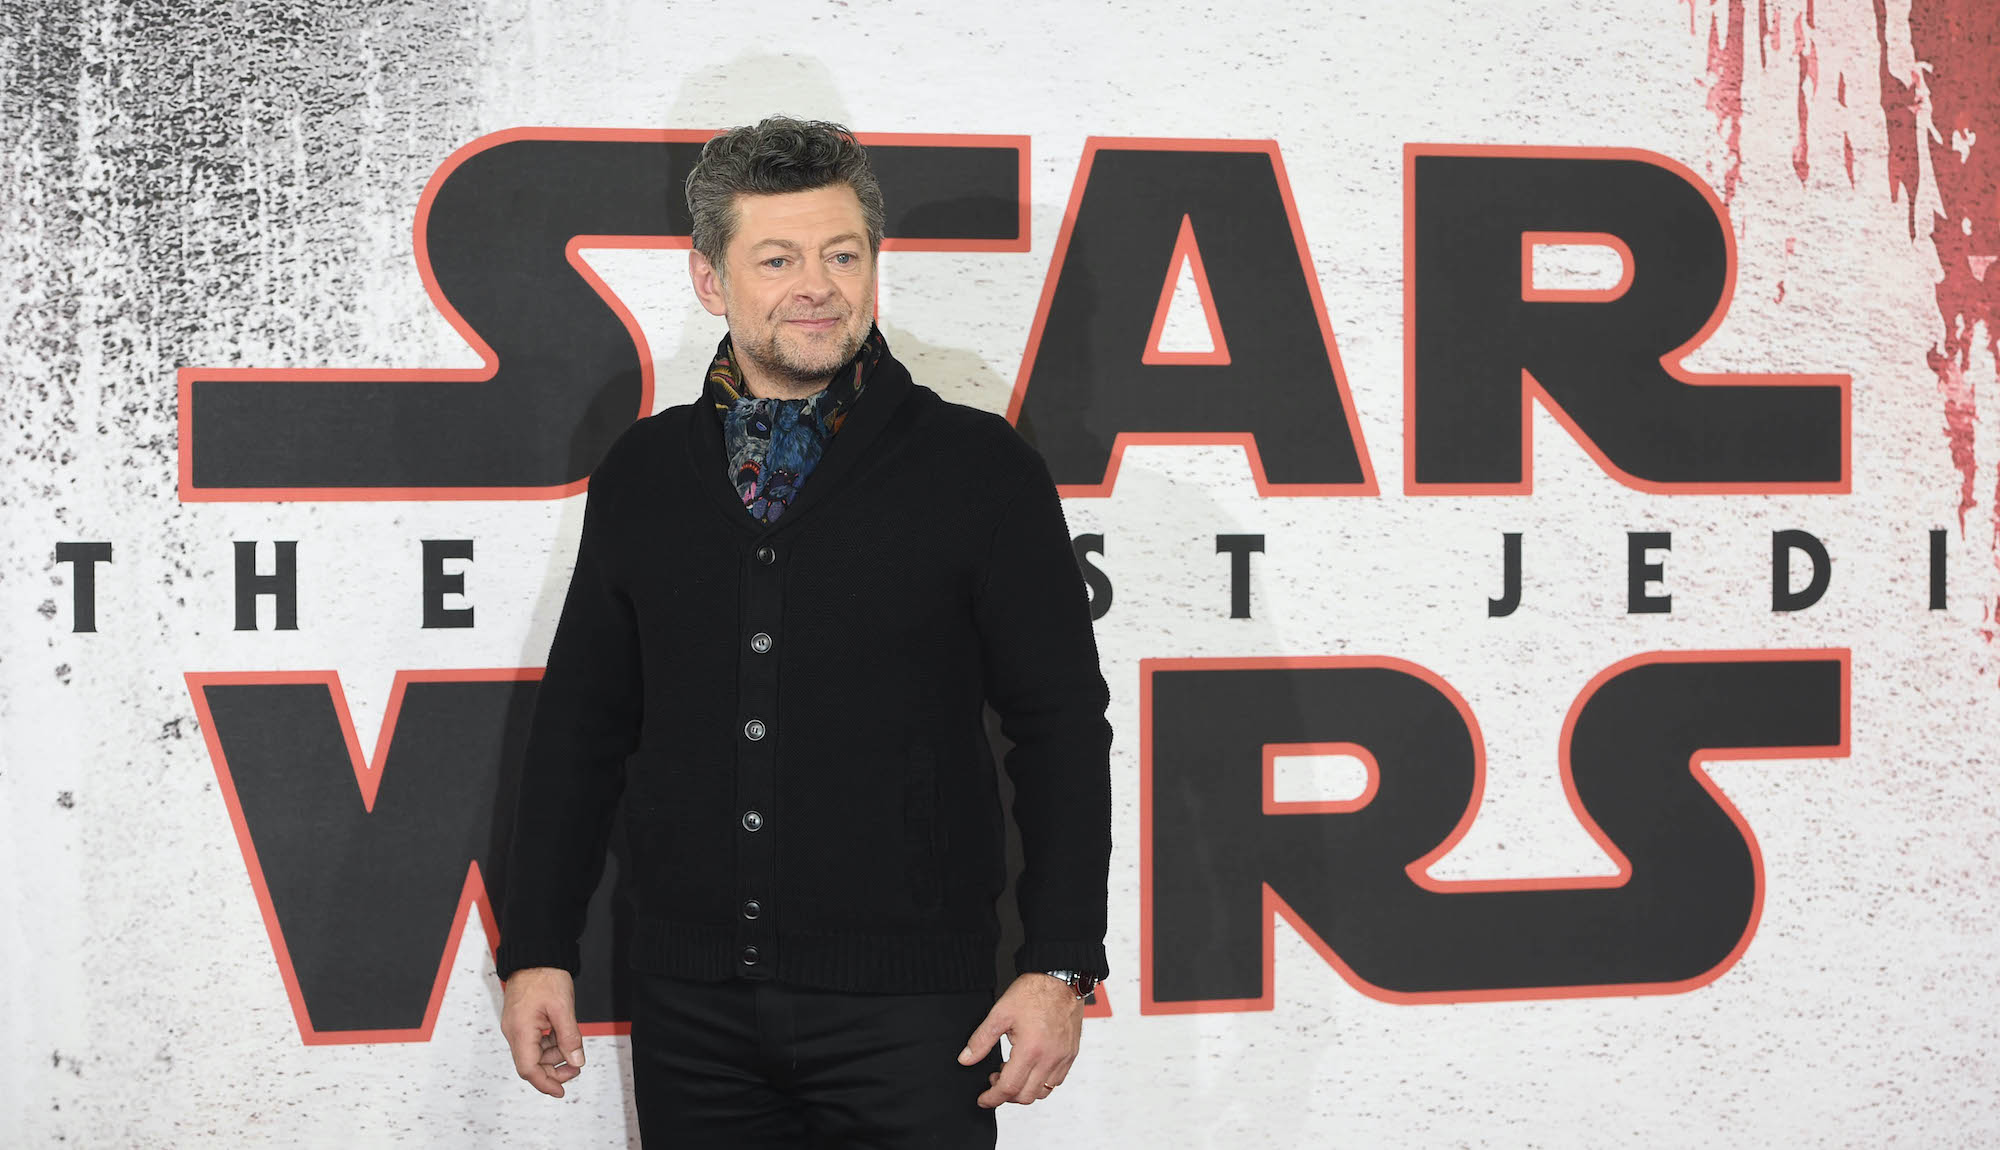 Andy Serkis during the 'Star Wars: The Last Jedi' photo call on Dec. 13, 2017 in London, England. He stands in black pants and a black sweater with a blue and purple scarf in front of a white and red backdrop that says 'Star Wars: The Last Jedi.'